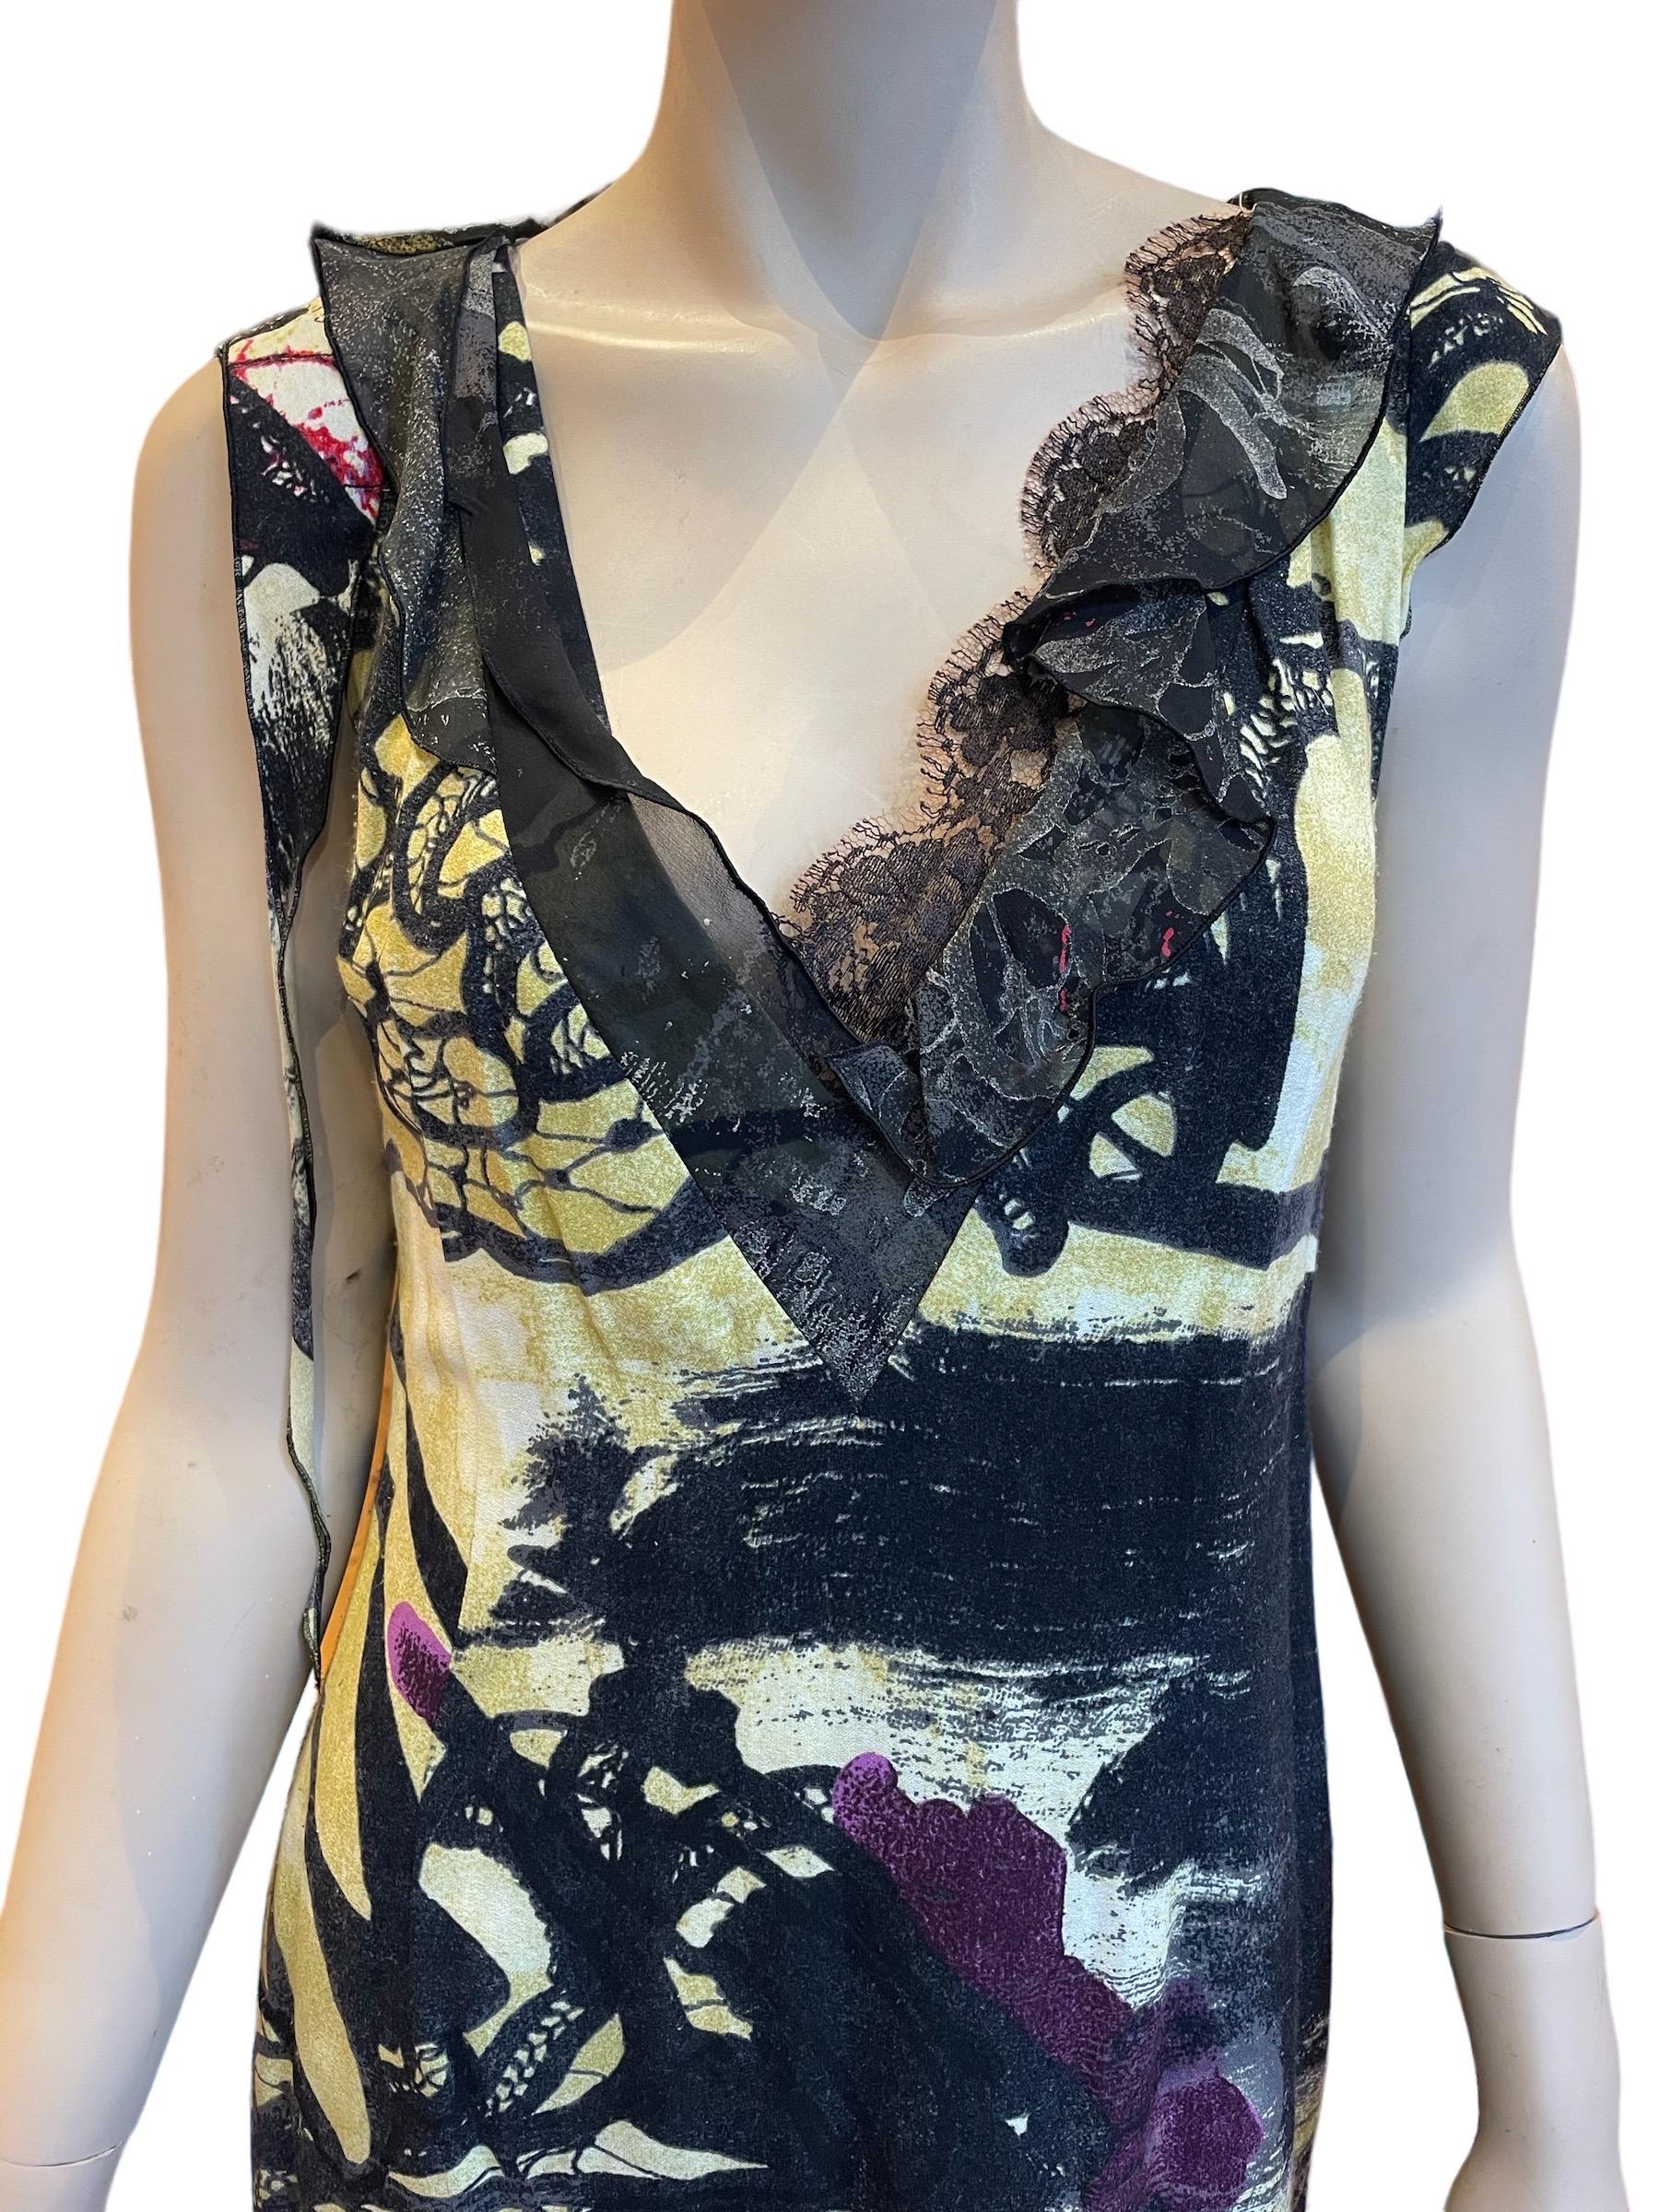 Y2K Christian Lacroix Yellow Abstract Whimsy Goth Sleeveless Dress 

A fashionable causal going out dress. Adorable whimsy goth vibes with an abstract print and lacy detail around the V neckline. Can be dressed up or down. Very comfortable. The